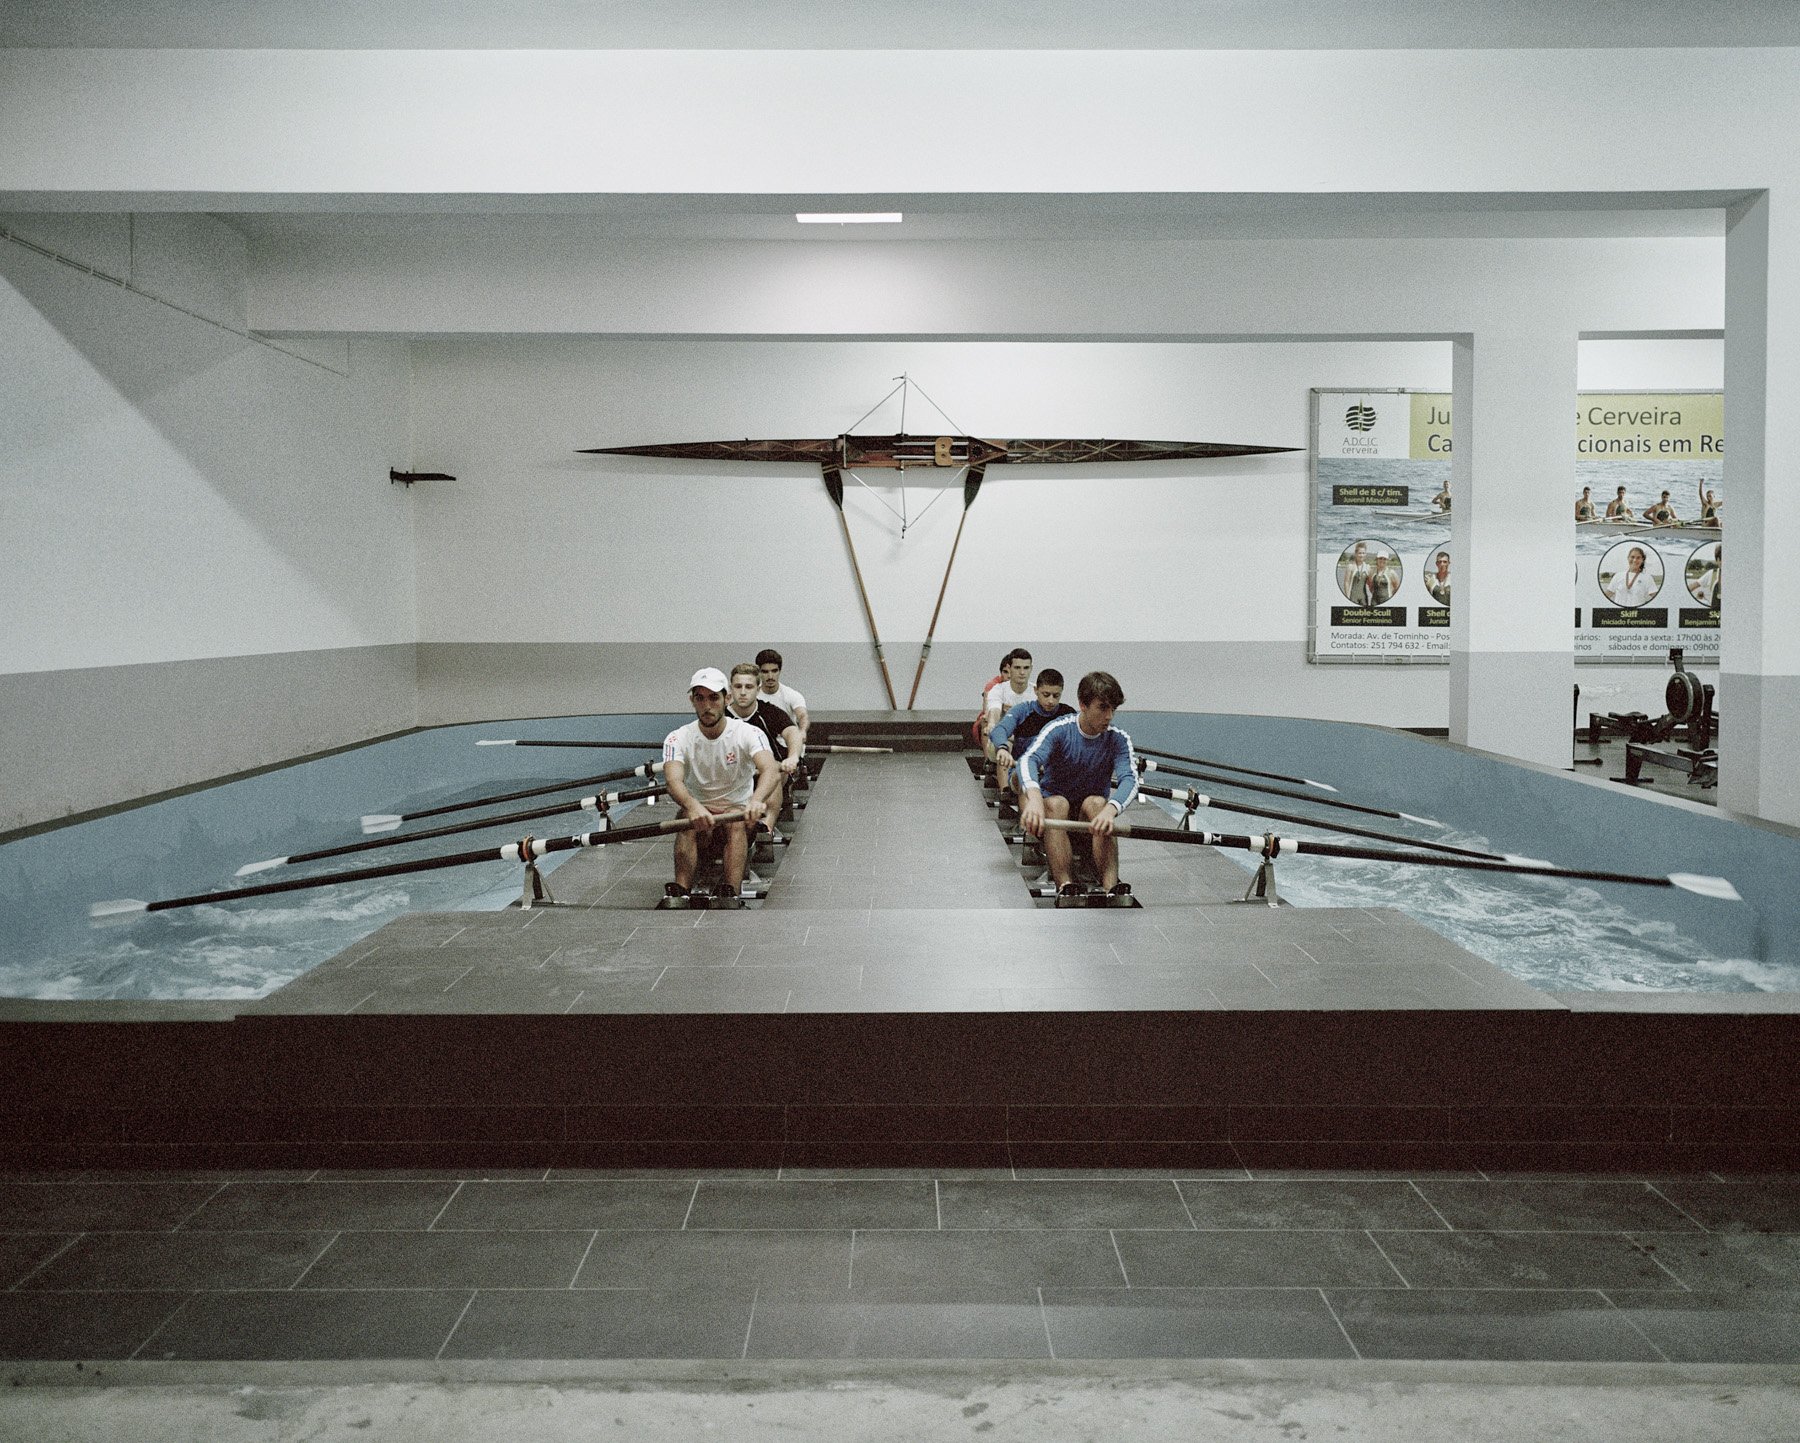  Vila Nova de Carbeira, Portugal, 2014. A team of oar train in an indoor pool loacted in front of the Minho River. 